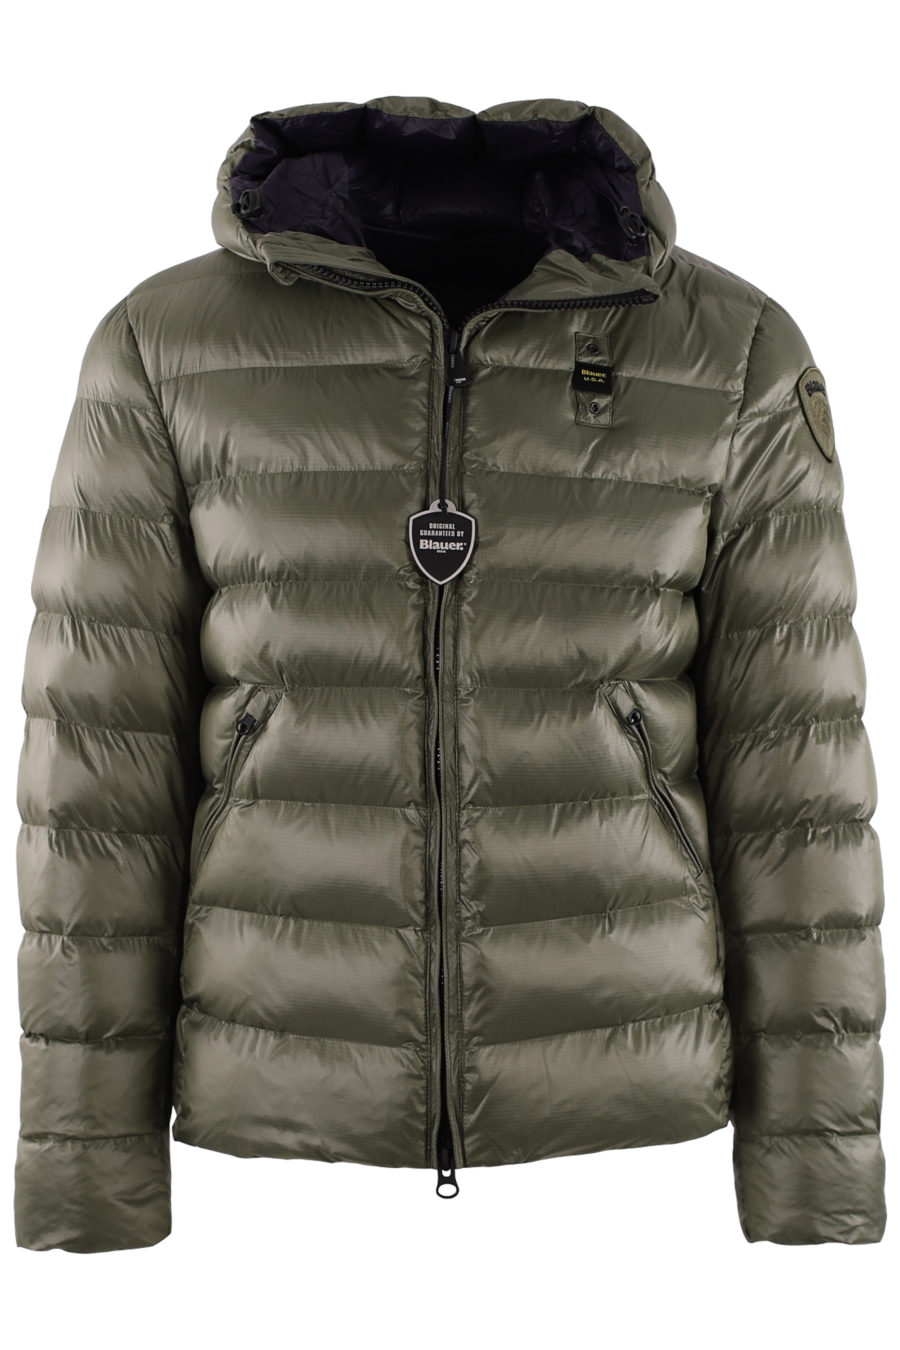 Green quilted down jacket with ecological filling - IMG 9379